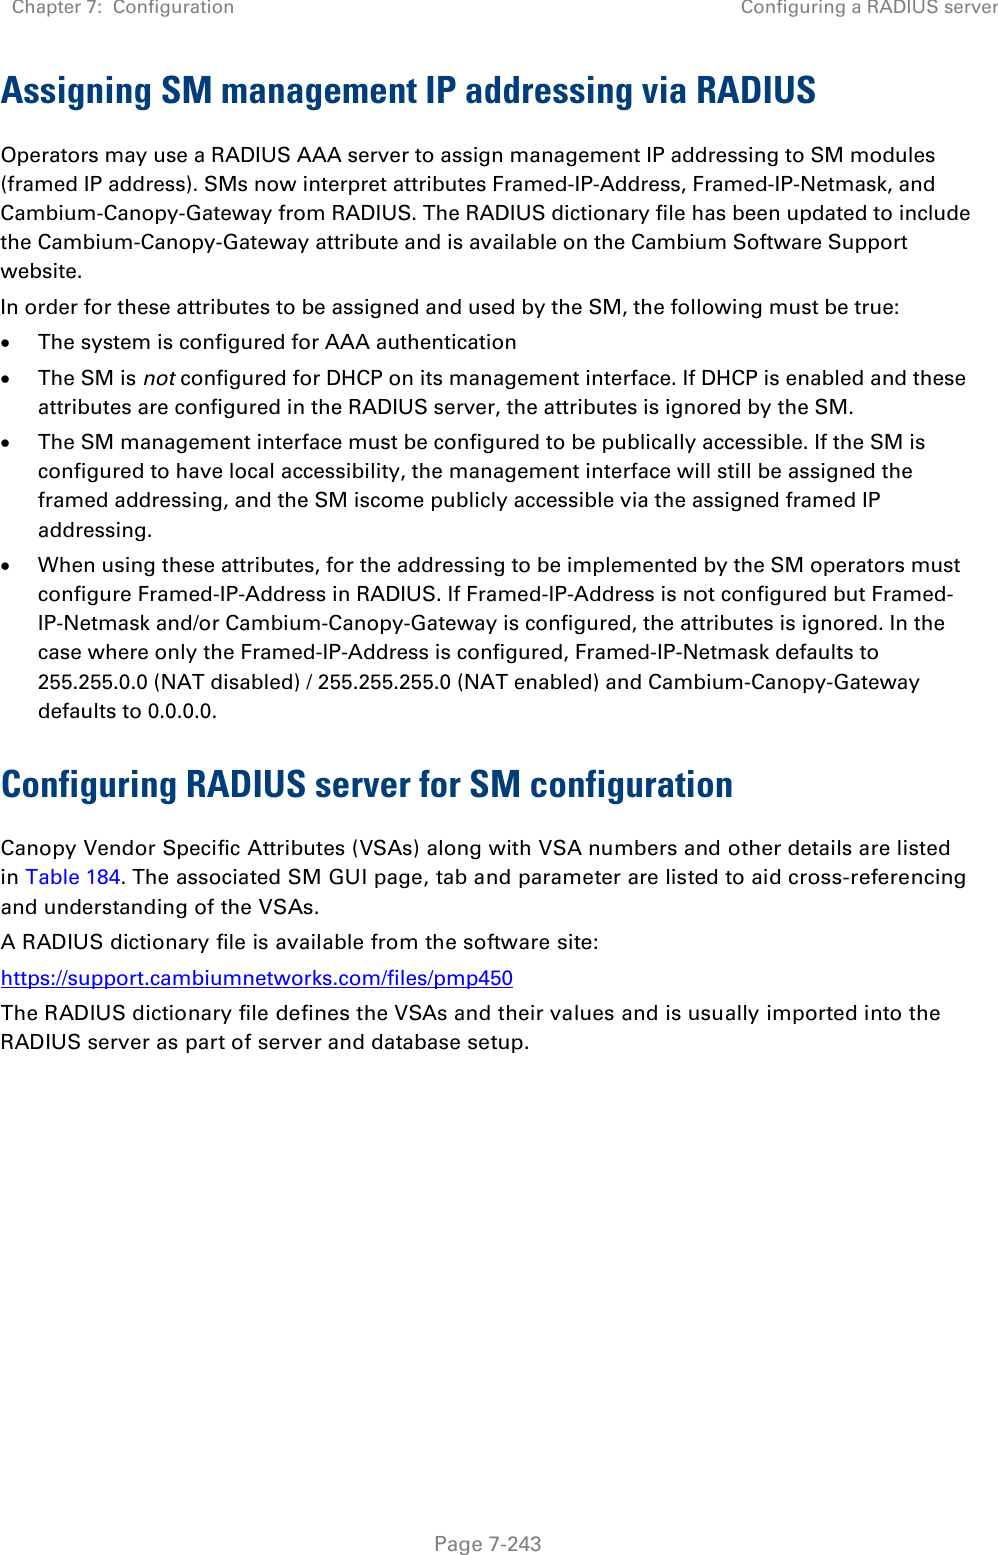 Chapter 7:  Configuration Configuring a RADIUS server   Page 7-243 Assigning SM management IP addressing via RADIUS Operators may use a RADIUS AAA server to assign management IP addressing to SM modules (framed IP address). SMs now interpret attributes Framed-IP-Address, Framed-IP-Netmask, and Cambium-Canopy-Gateway from RADIUS. The RADIUS dictionary file has been updated to include the Cambium-Canopy-Gateway attribute and is available on the Cambium Software Support website. In order for these attributes to be assigned and used by the SM, the following must be true: • The system is configured for AAA authentication • The SM is not configured for DHCP on its management interface. If DHCP is enabled and these attributes are configured in the RADIUS server, the attributes is ignored by the SM. • The SM management interface must be configured to be publically accessible. If the SM is configured to have local accessibility, the management interface will still be assigned the framed addressing, and the SM iscome publicly accessible via the assigned framed IP addressing. • When using these attributes, for the addressing to be implemented by the SM operators must configure Framed-IP-Address in RADIUS. If Framed-IP-Address is not configured but Framed-IP-Netmask and/or Cambium-Canopy-Gateway is configured, the attributes is ignored. In the case where only the Framed-IP-Address is configured, Framed-IP-Netmask defaults to 255.255.0.0 (NAT disabled) / 255.255.255.0 (NAT enabled) and Cambium-Canopy-Gateway defaults to 0.0.0.0. Configuring RADIUS server for SM configuration Canopy Vendor Specific Attributes (VSAs) along with VSA numbers and other details are listed in Table 184. The associated SM GUI page, tab and parameter are listed to aid cross-referencing and understanding of the VSAs. A RADIUS dictionary file is available from the software site:  https://support.cambiumnetworks.com/files/pmp450 The RADIUS dictionary file defines the VSAs and their values and is usually imported into the RADIUS server as part of server and database setup.  